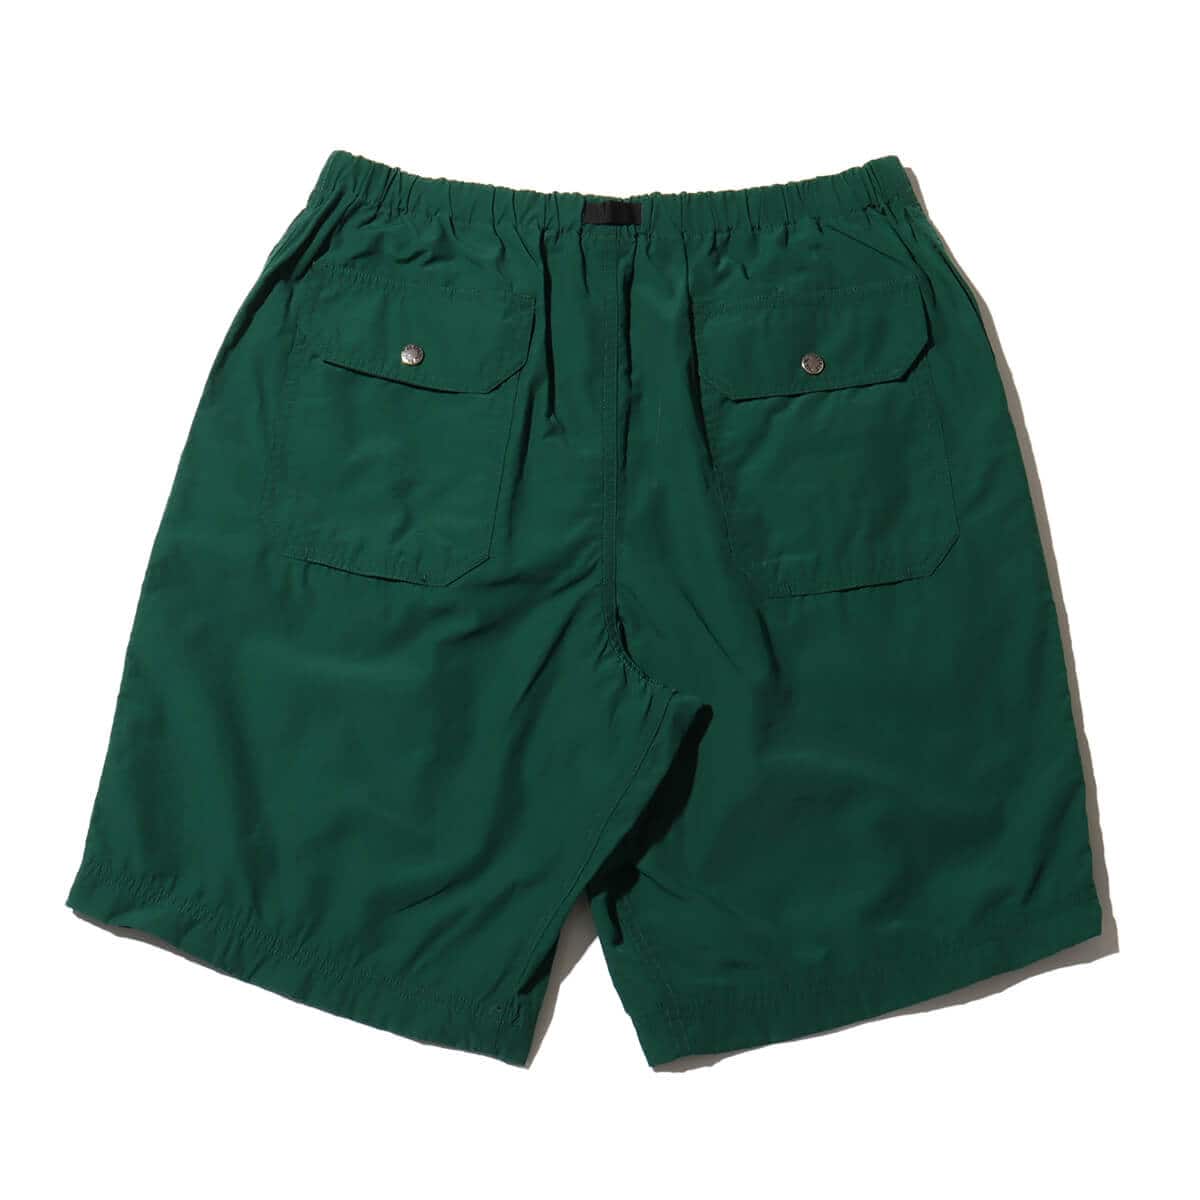 THE NORTH FACE PURPLE LABEL Field River Shorts Spruce